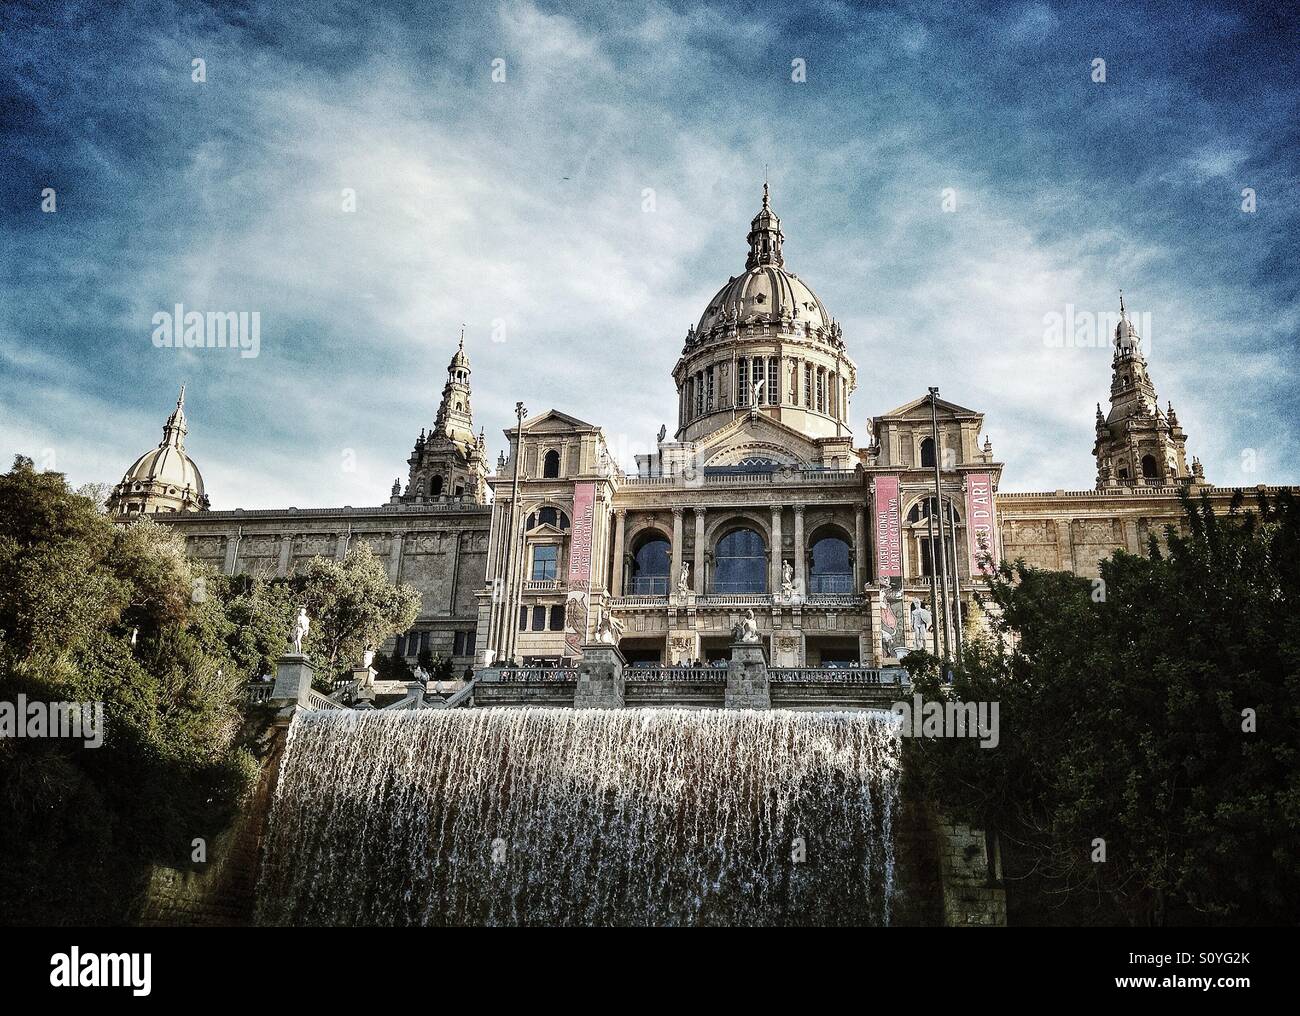 MNAC (National Art Museum of Catalonia) in Barcelona, Spain Stock Photo